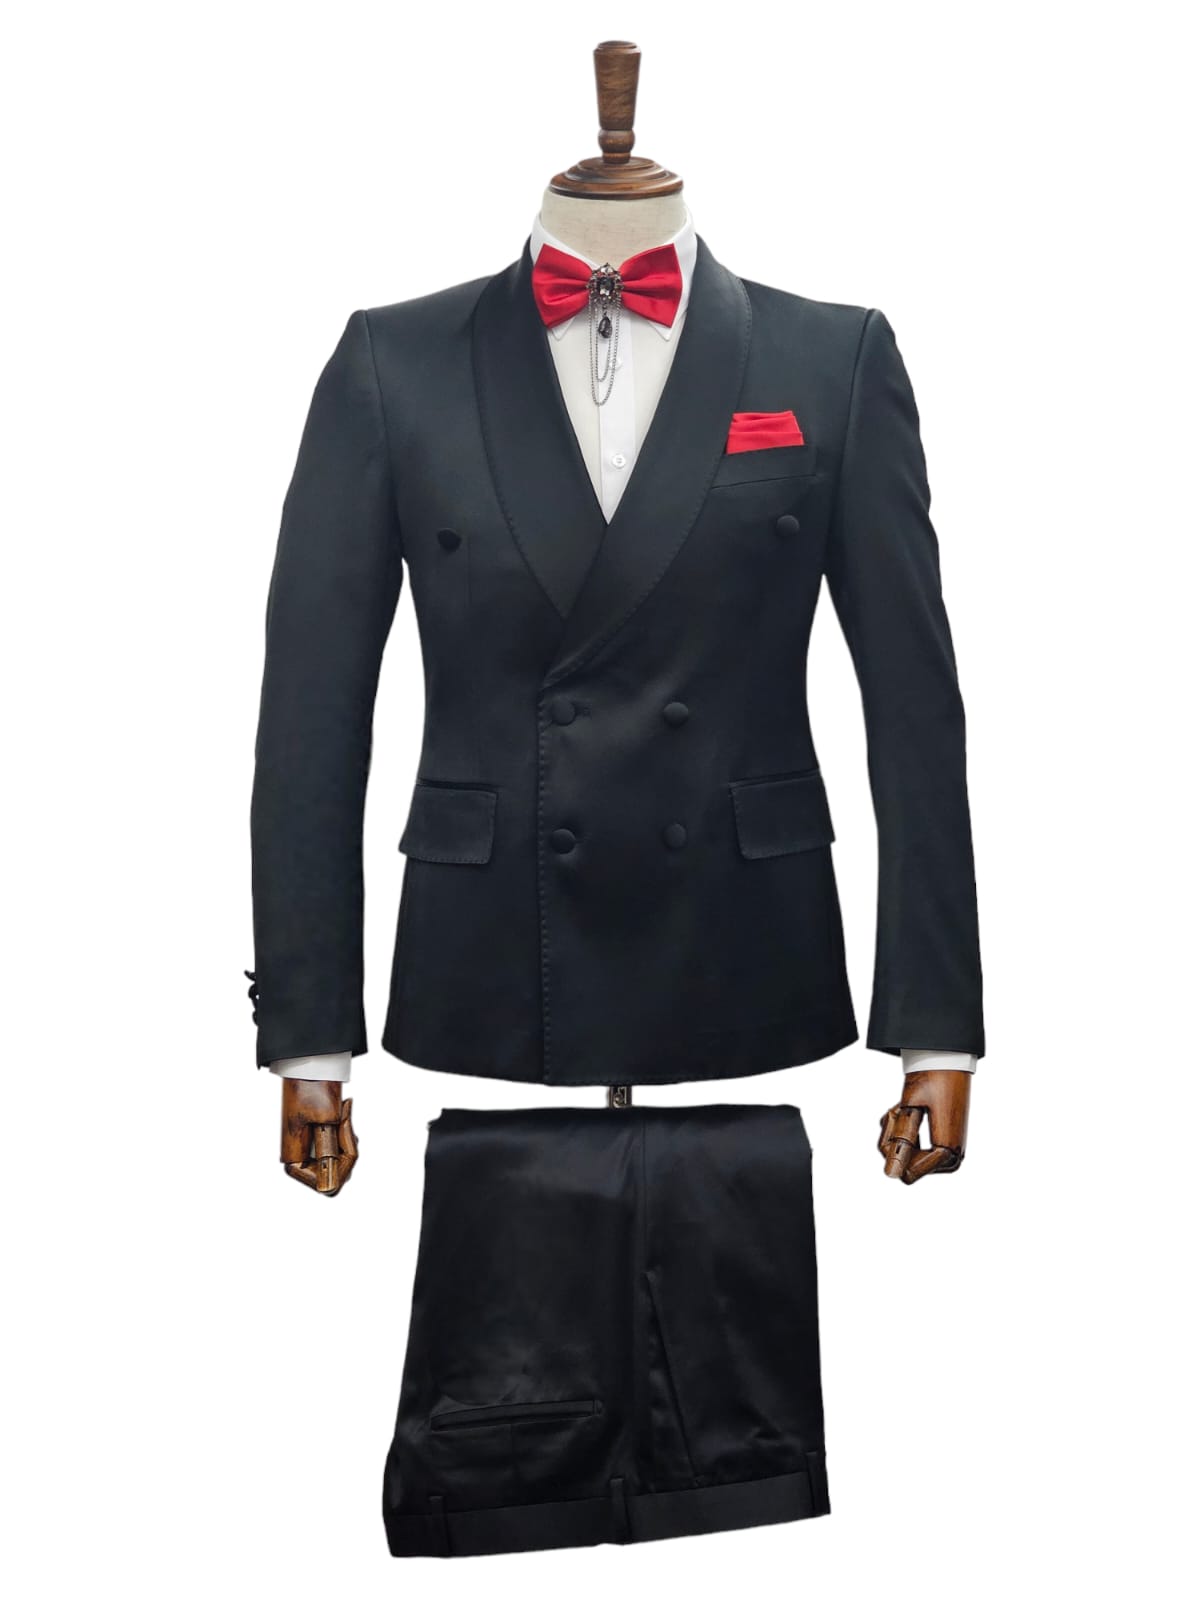 KCT Menswear Black Double Breasted Suit Fall 2023.